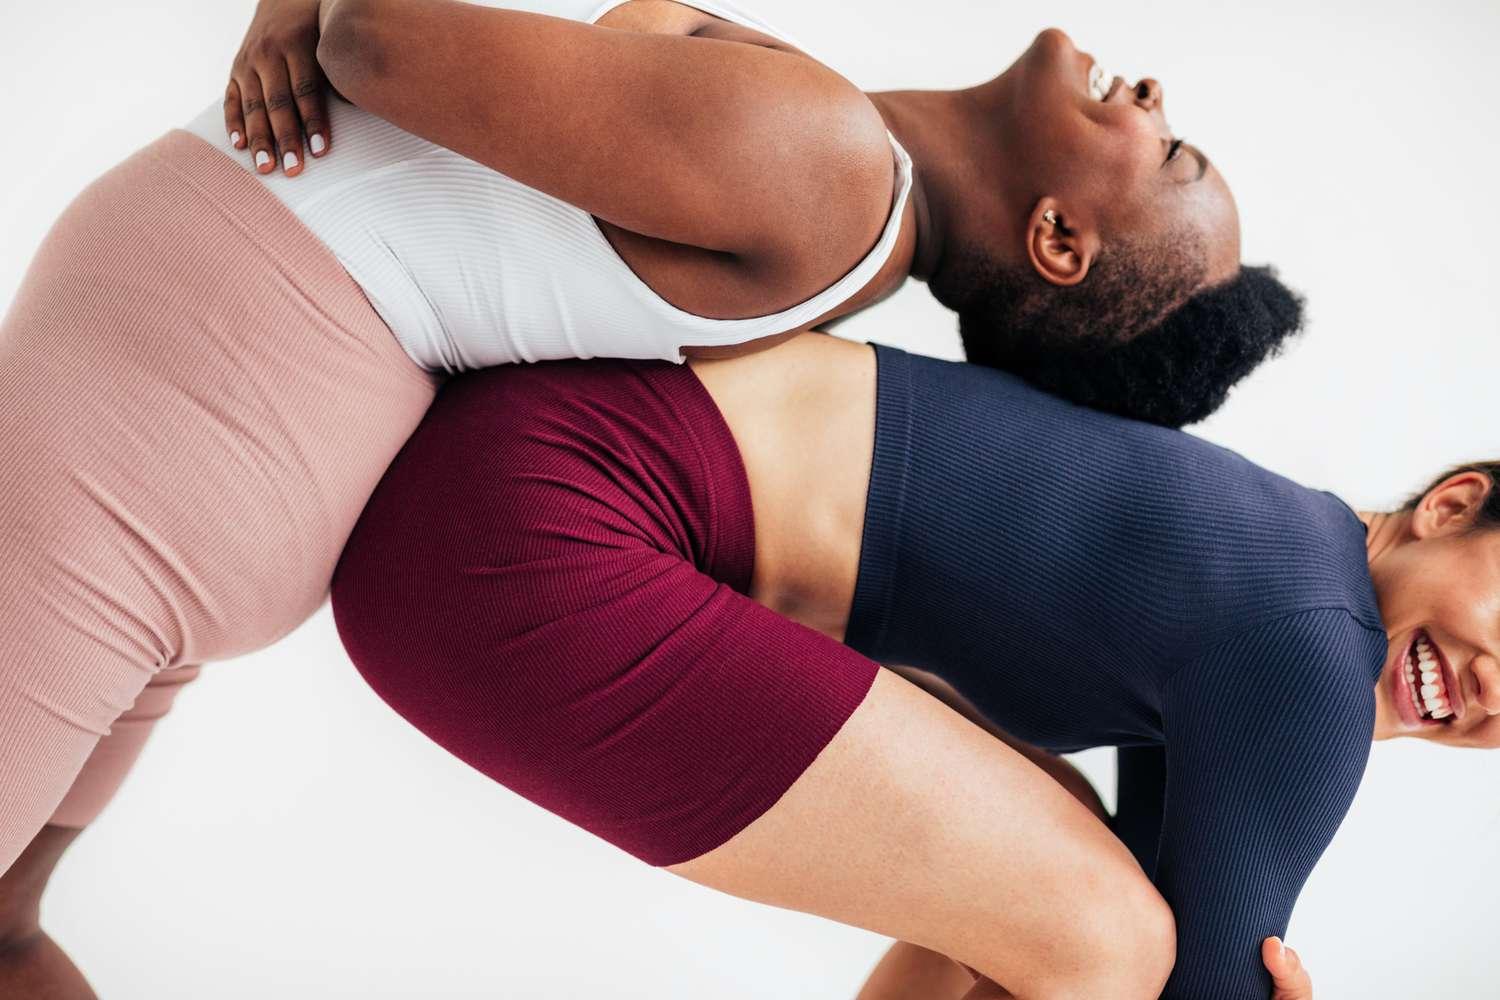 These Fitness Pros Are Making the Workout World More Inclusive